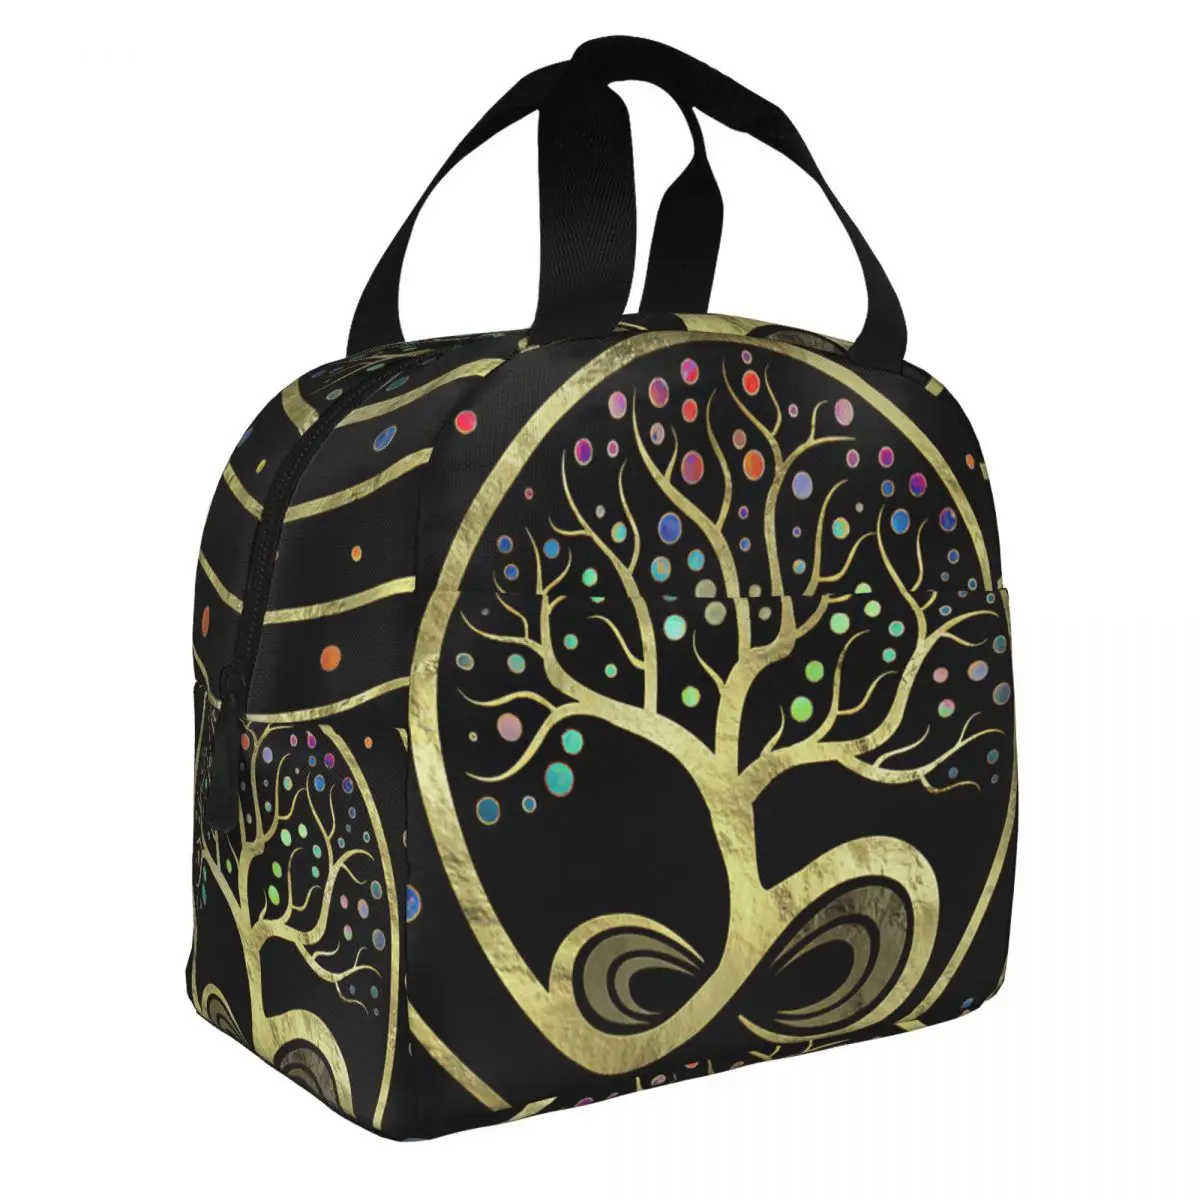 Tree Of Life - Infinity Spiral Lunch Bento Bags Portable Aluminum Foil thickened Thermal Cloth Lunch Bag for Women Men Boy